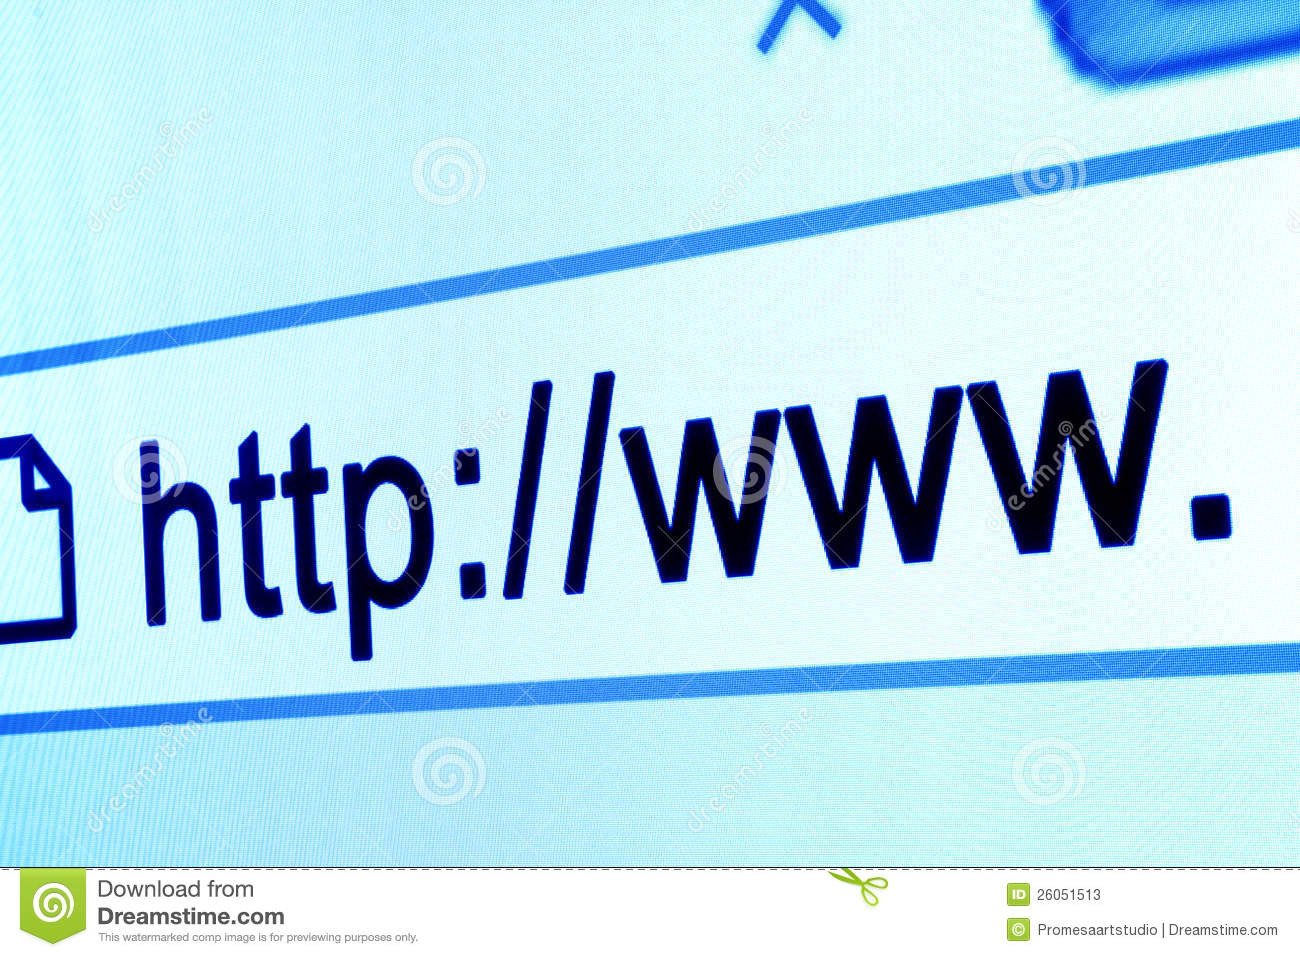 Http: Http Www Browser Bar Stock S Image